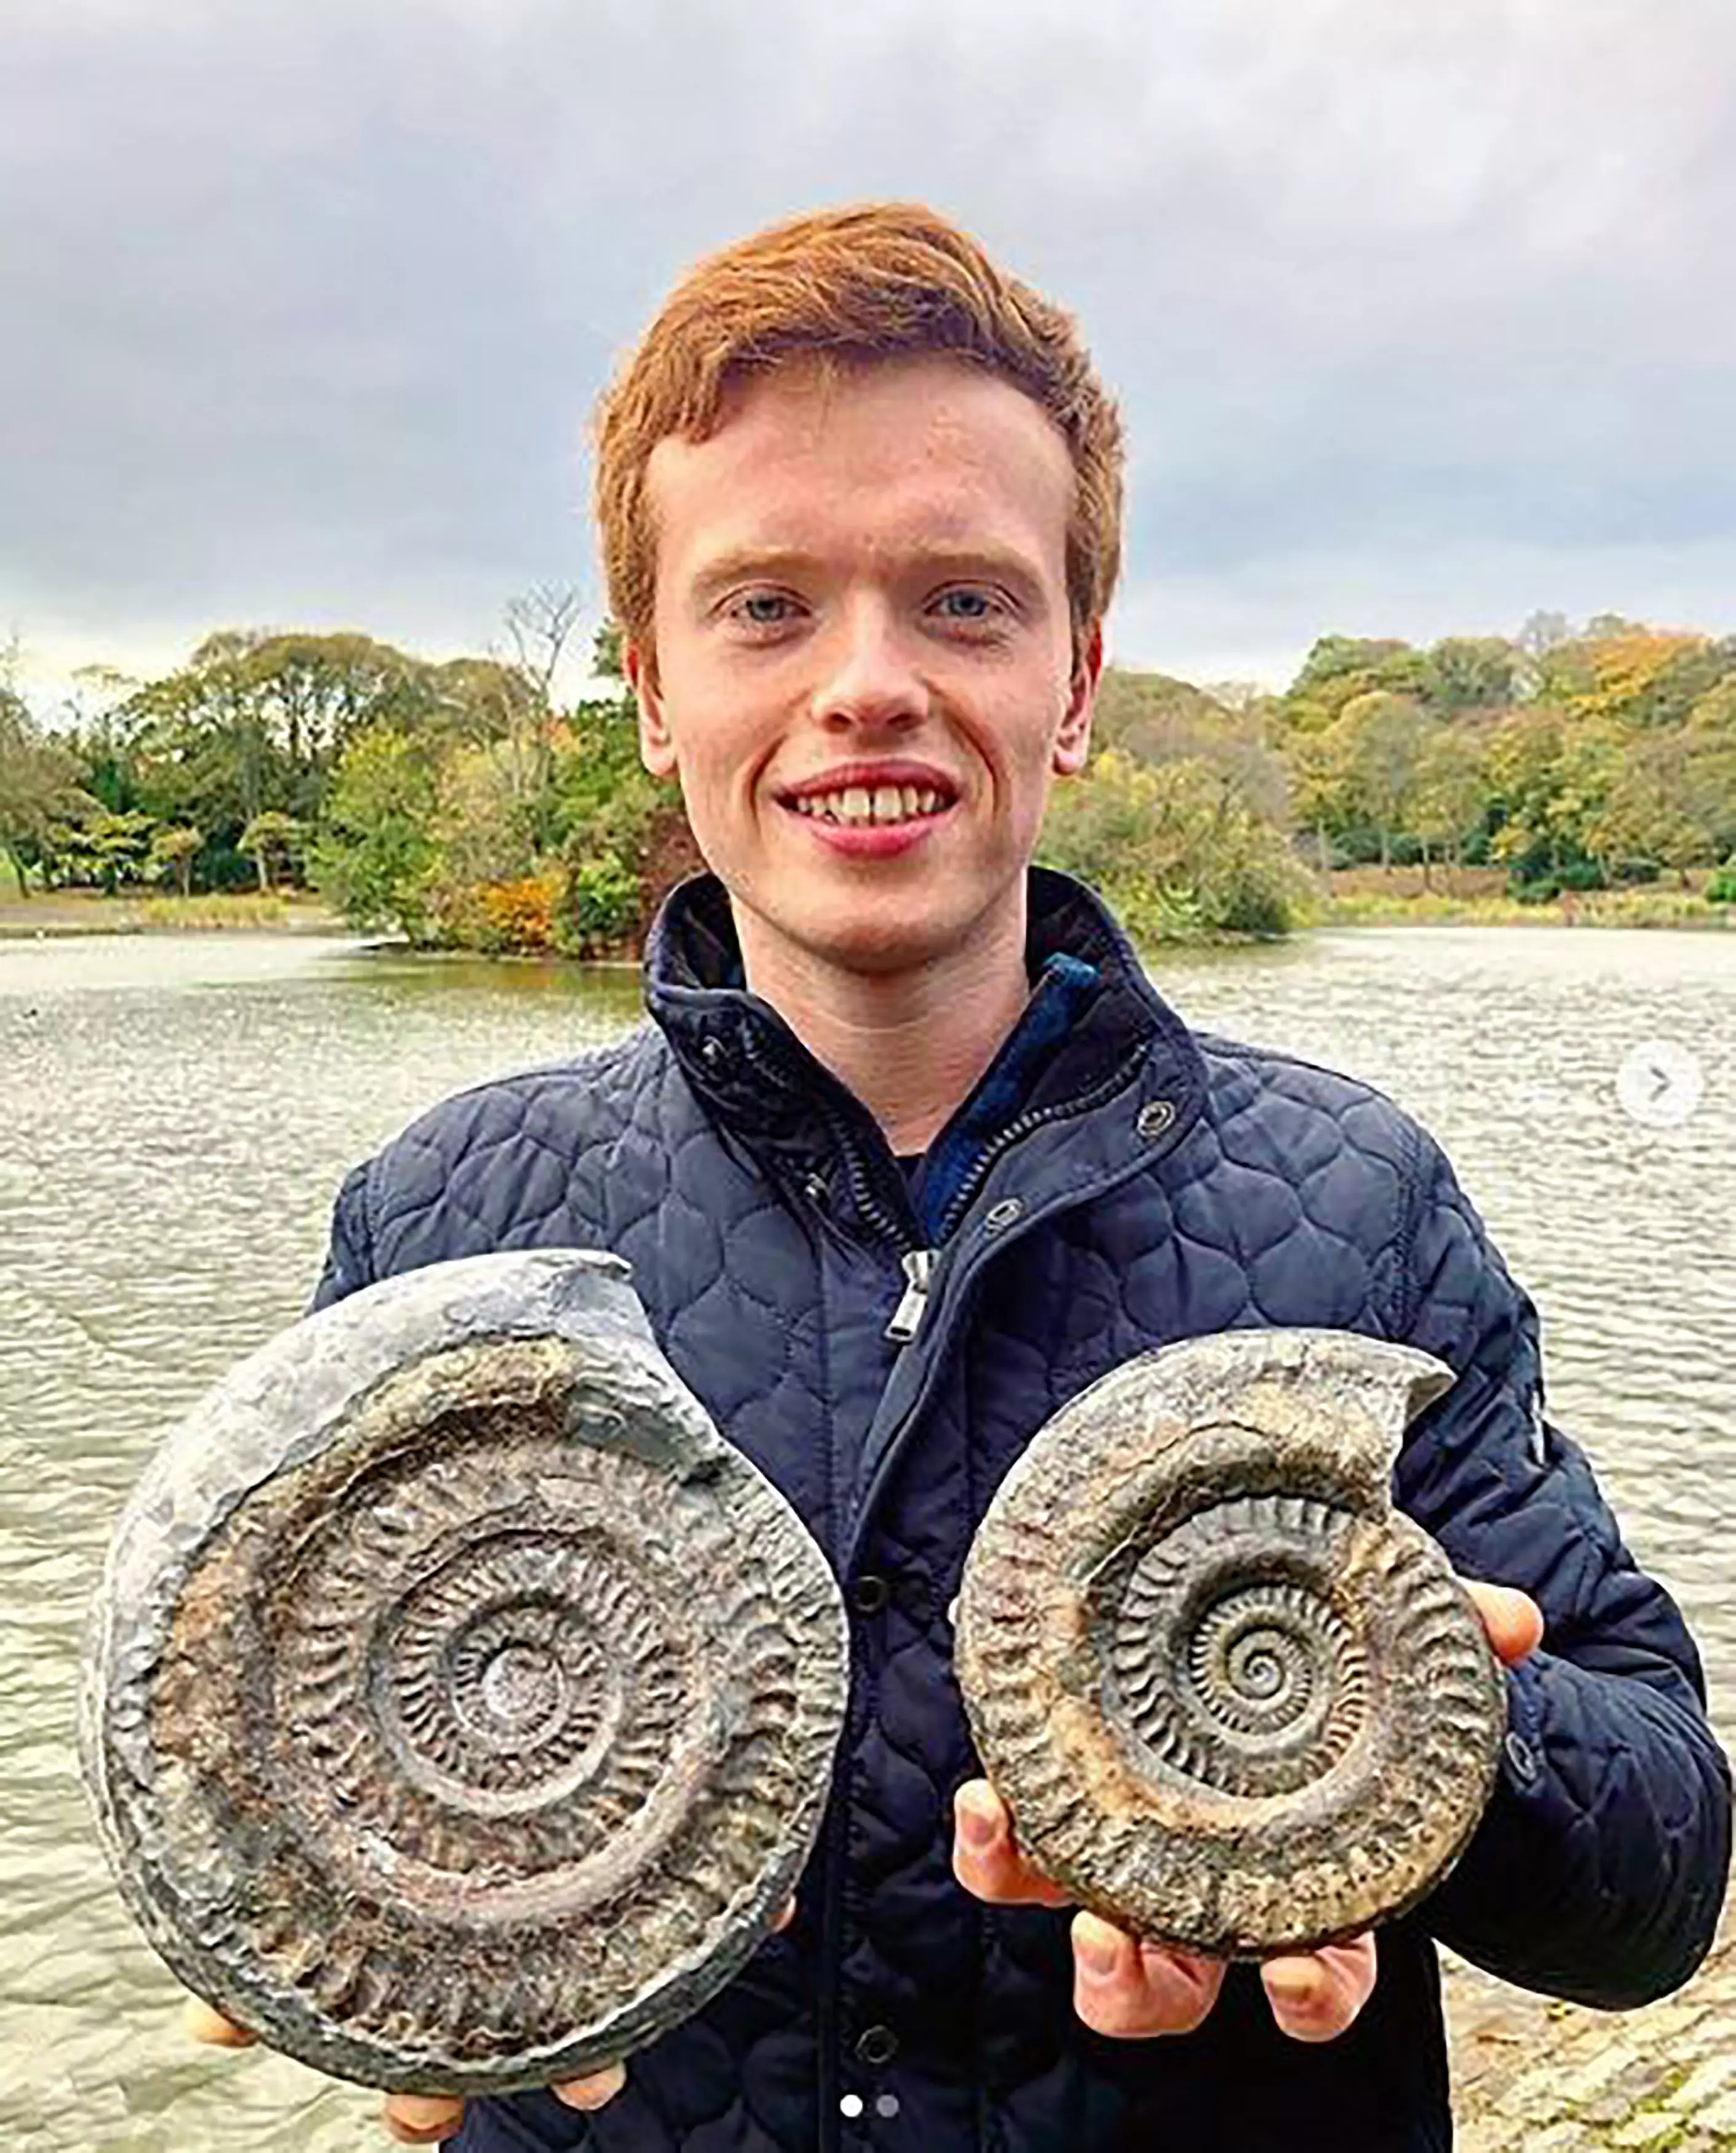 Aaron goes fossil hunting twice a week and was very excited with his find.